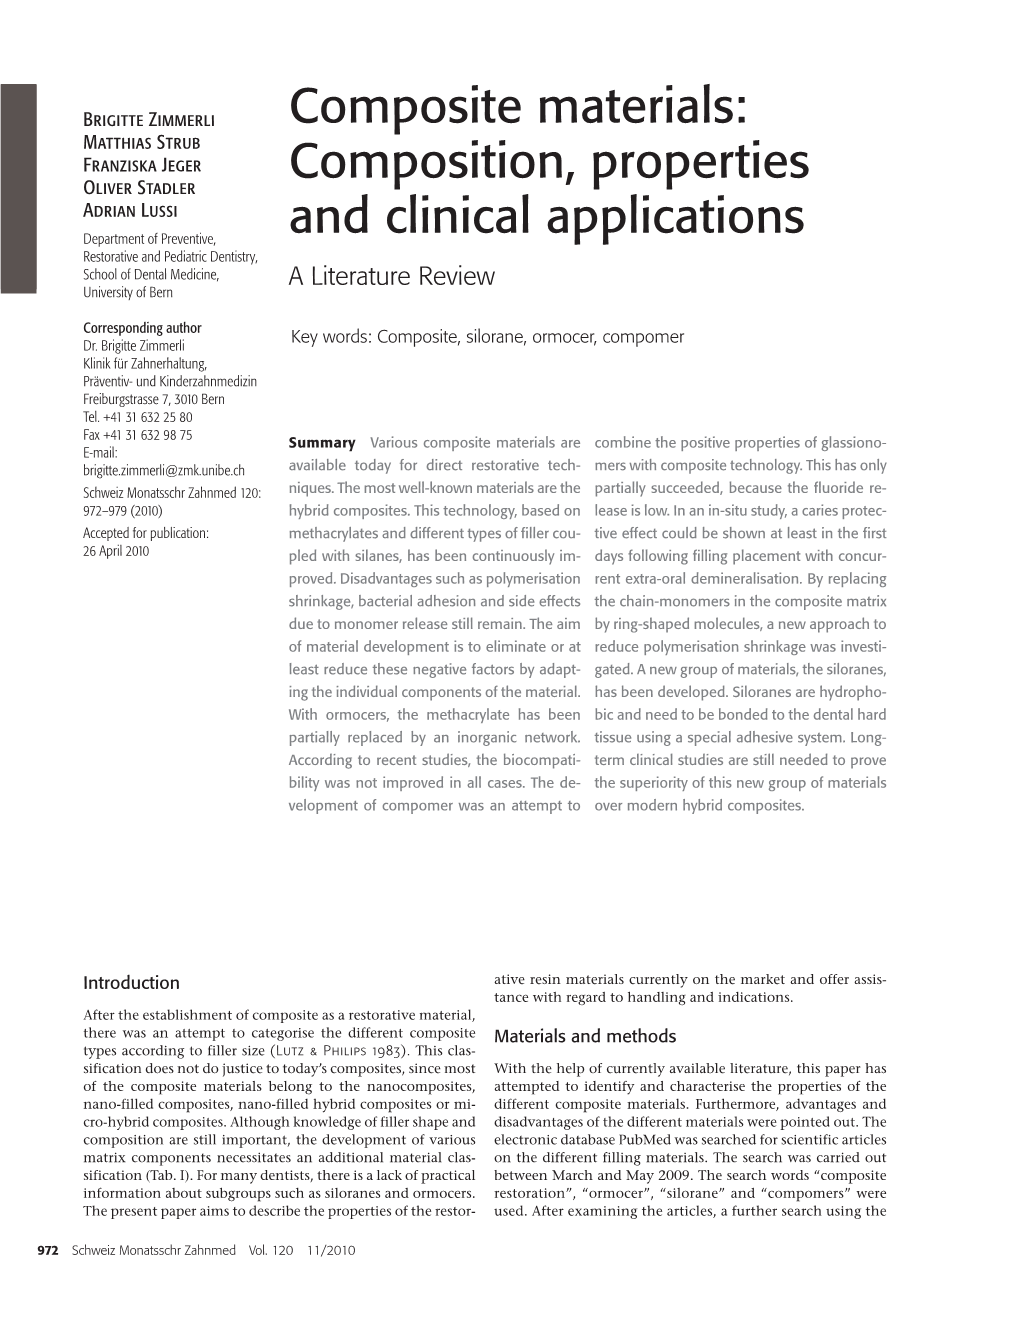 Composite Materials: Composition, Properties and Clinical Applications